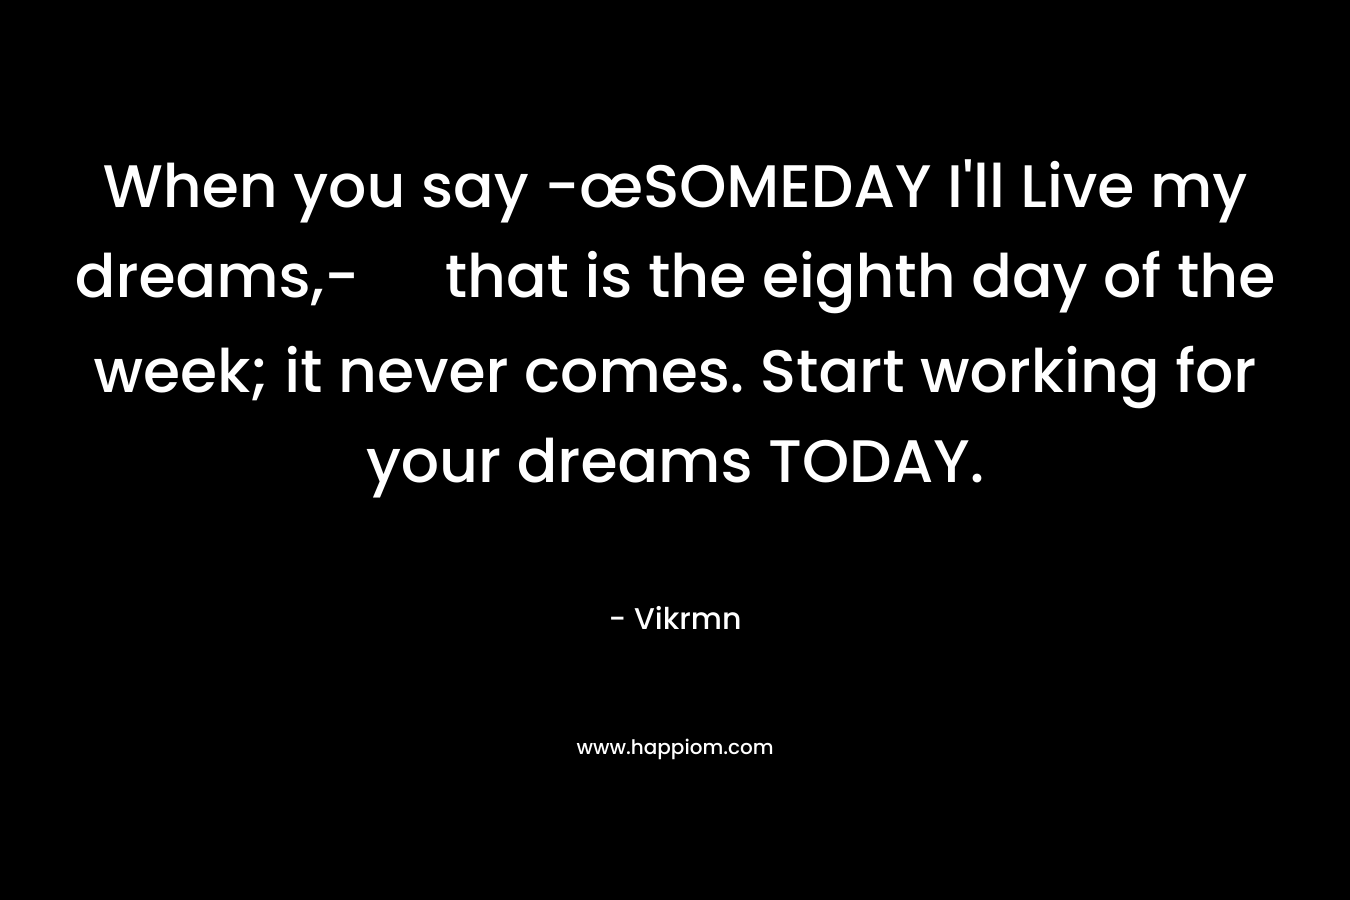 When you say -œSOMEDAY I’ll Live my dreams,- that is the eighth day of the week; it never comes. Start working for your dreams TODAY. – Vikrmn